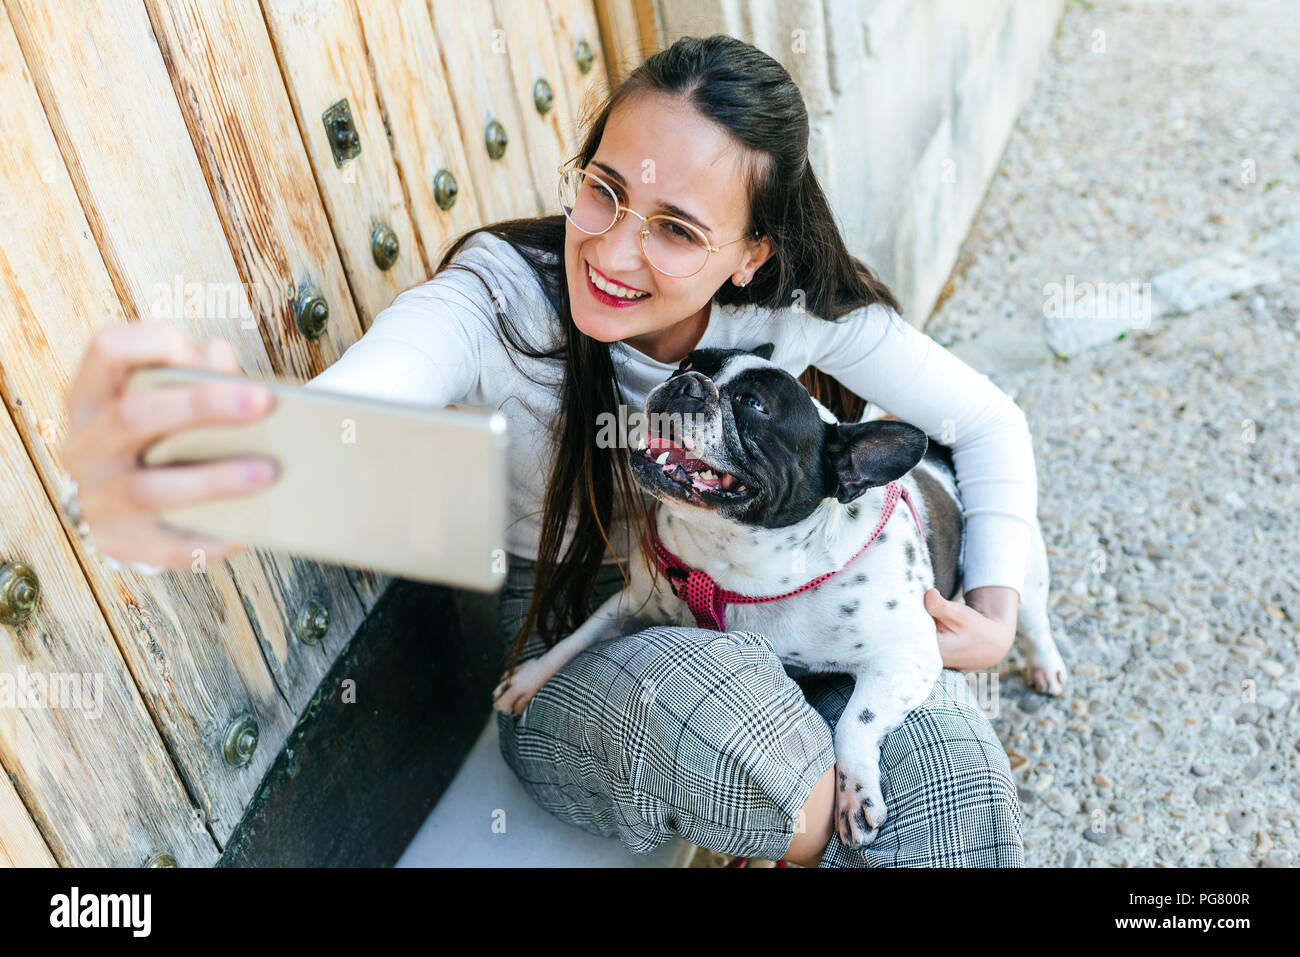 Young woman using smartphone, taking a selfie with her dog Stock Photo